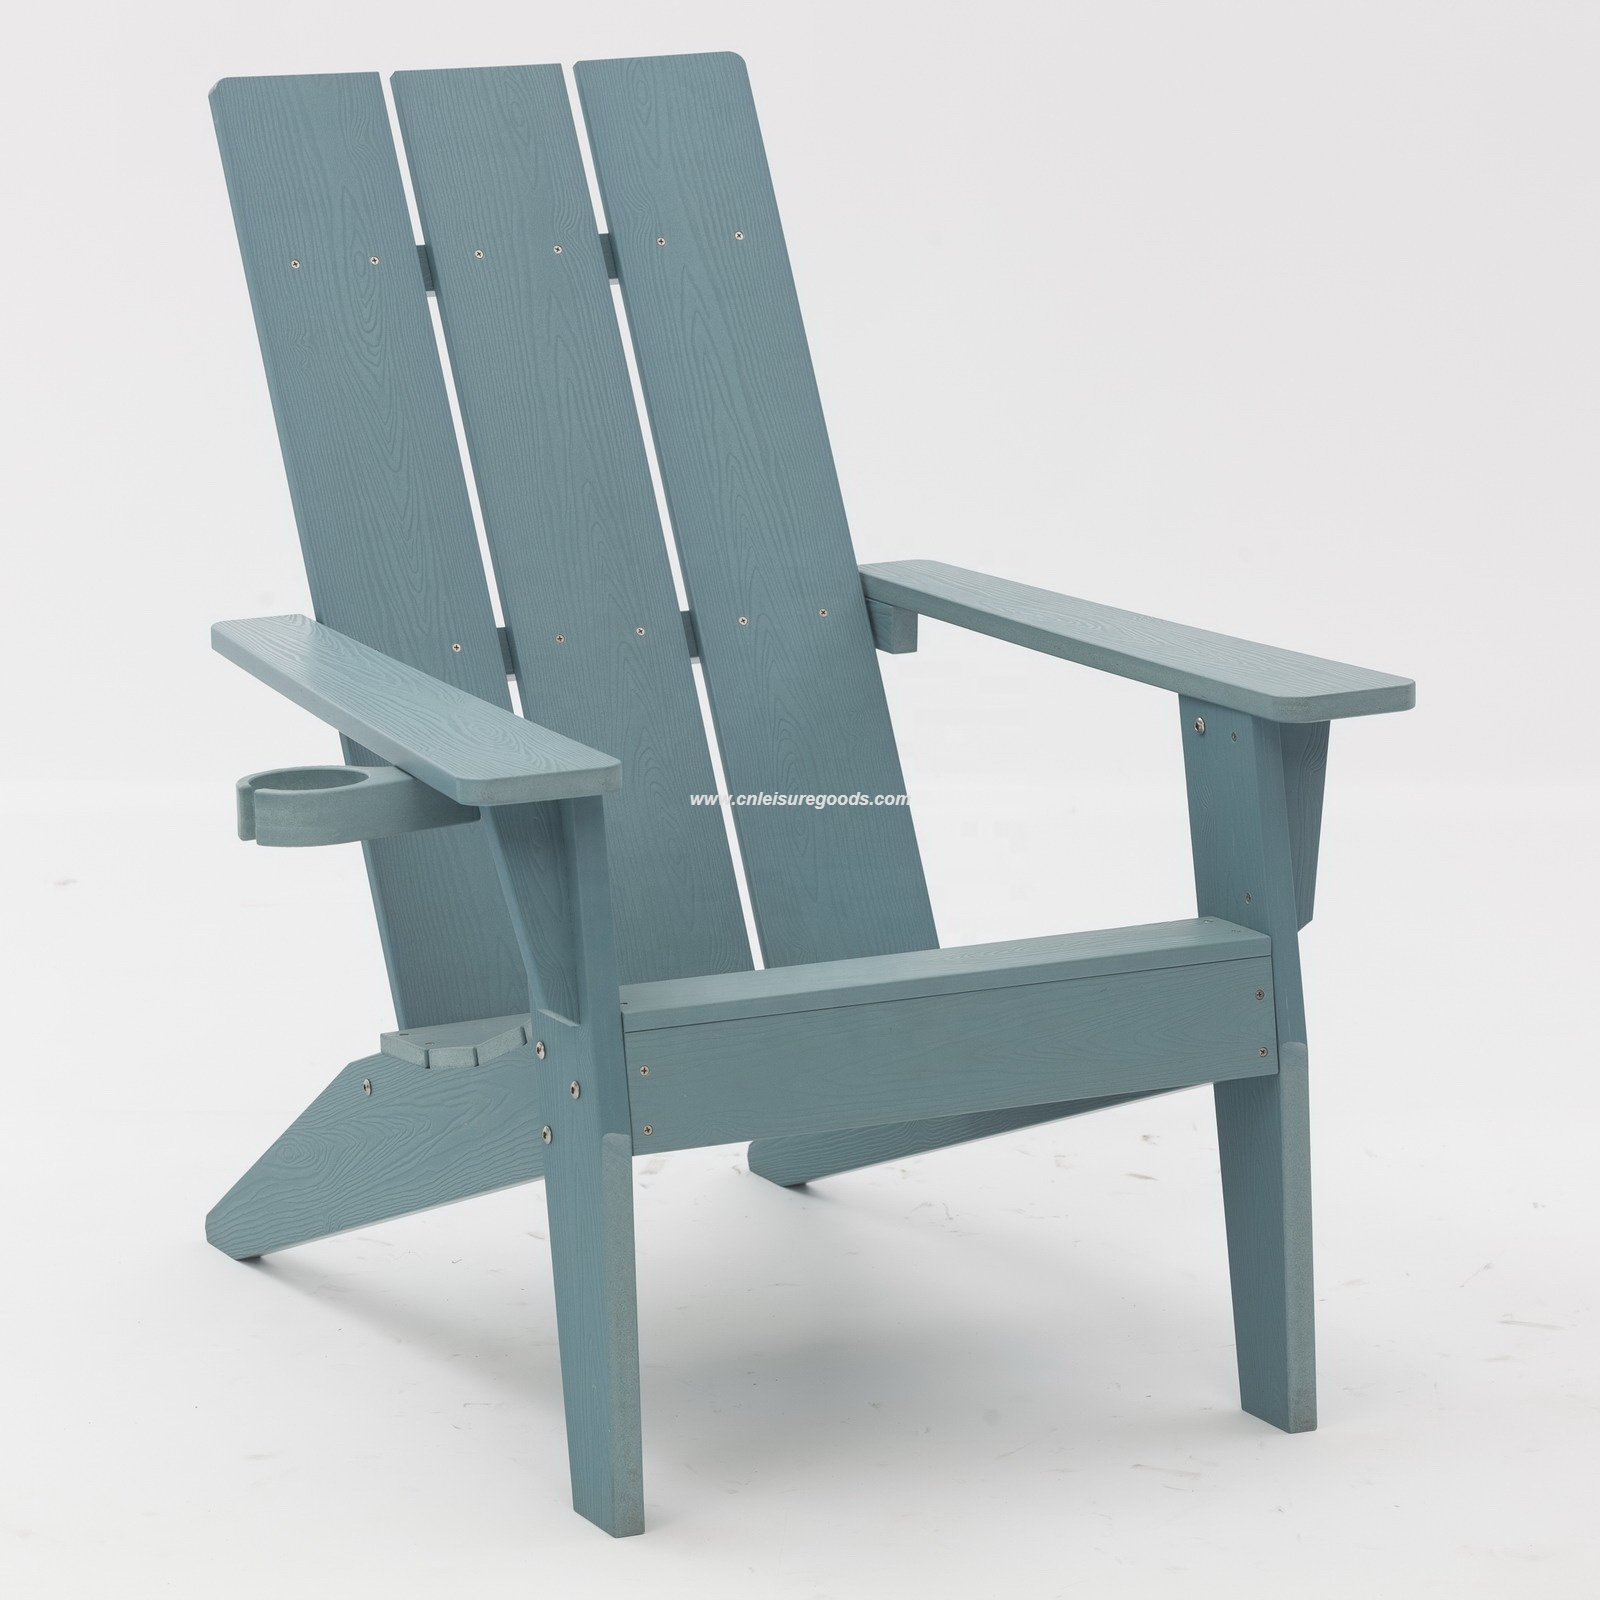 Uplion Hips Plastic Wood Outdoor Patio Adirondack Chair With 3pcs Back